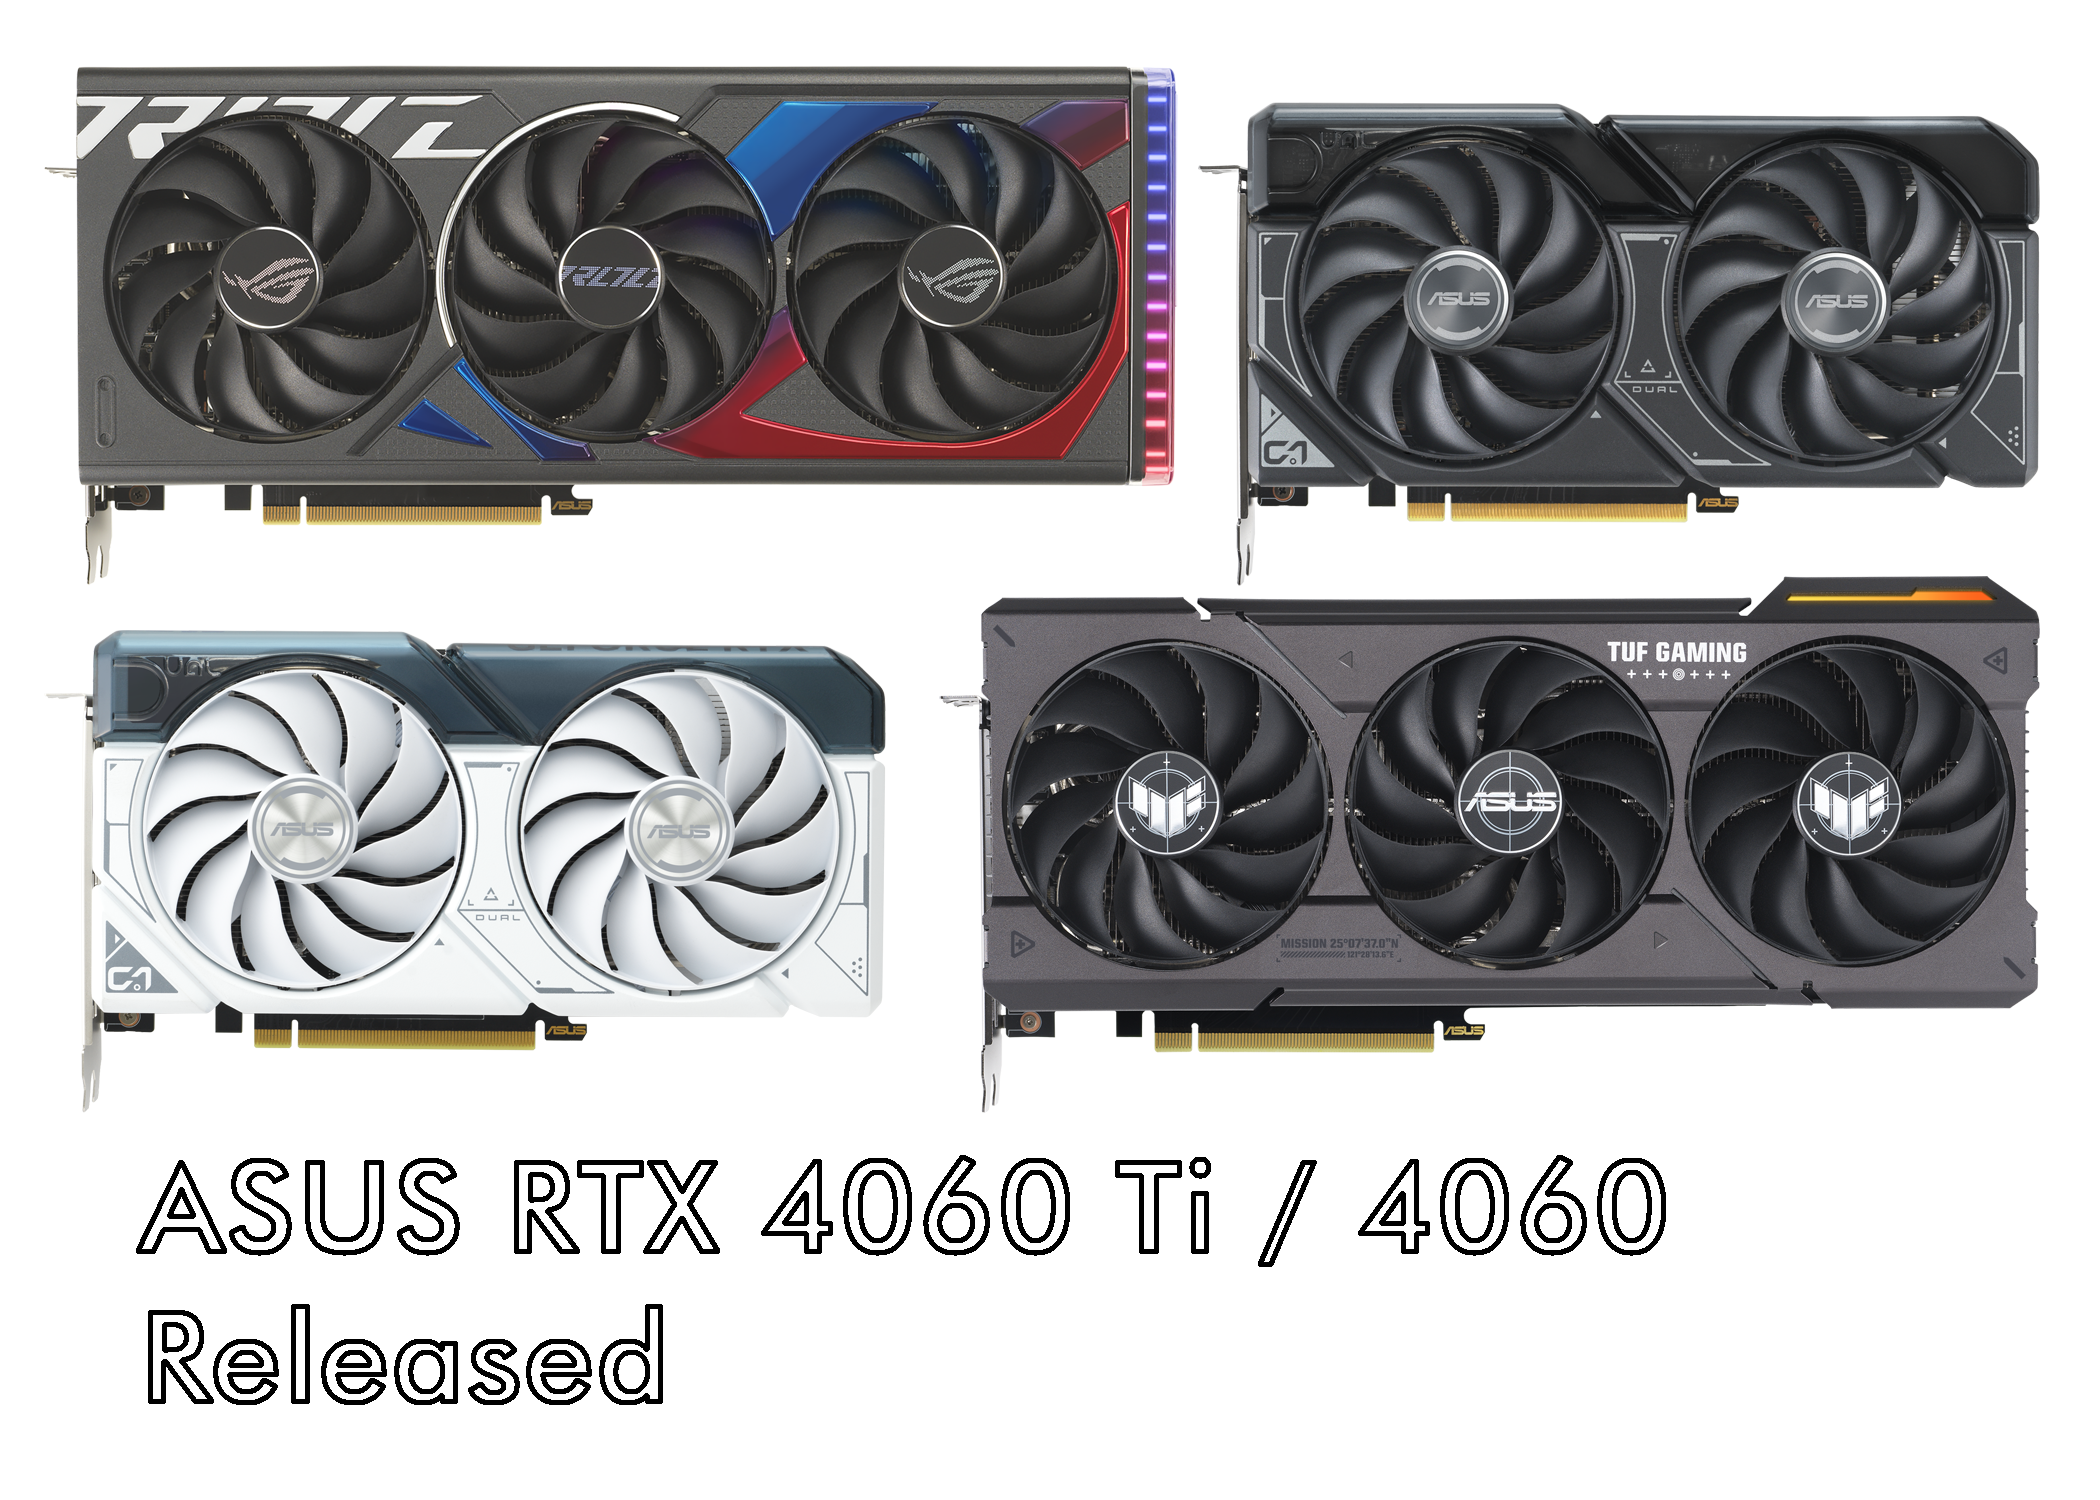 ASUS RTX 4060